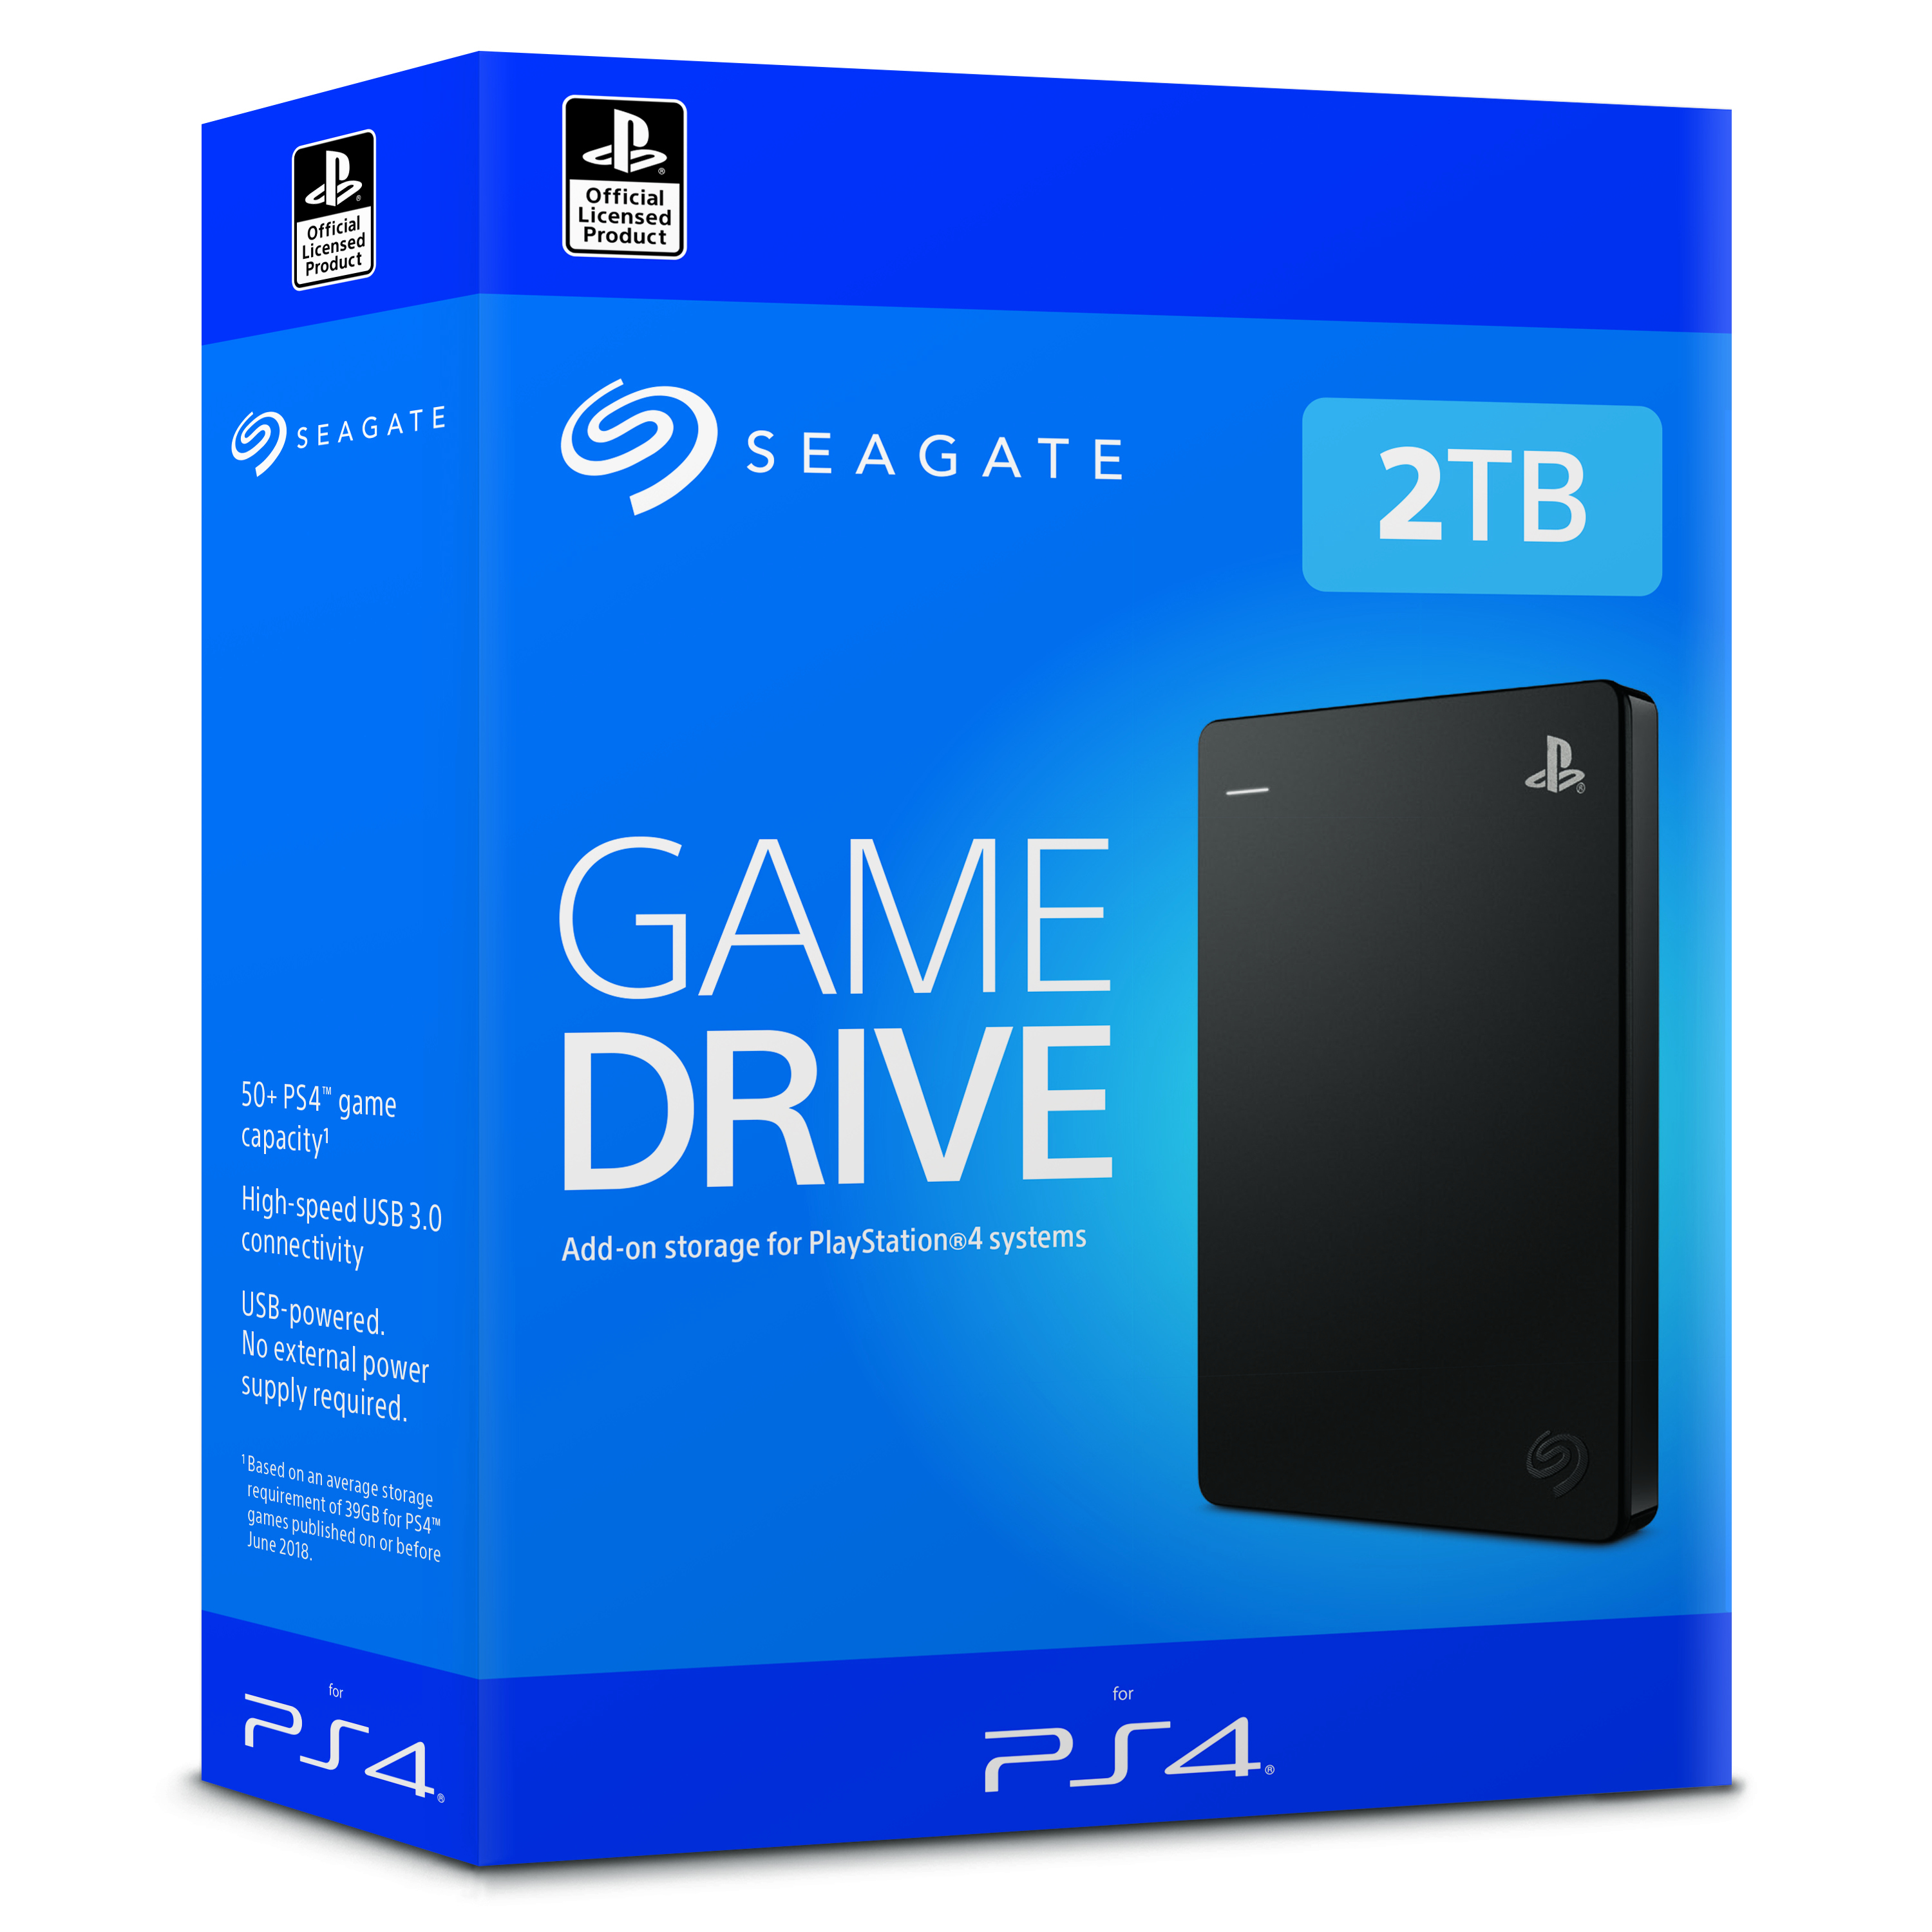 Seagate STGD2000200 | Festplatte - Seagate PS4 TB - STGD2000200 extern 2 - for (tragbar) Game Drive